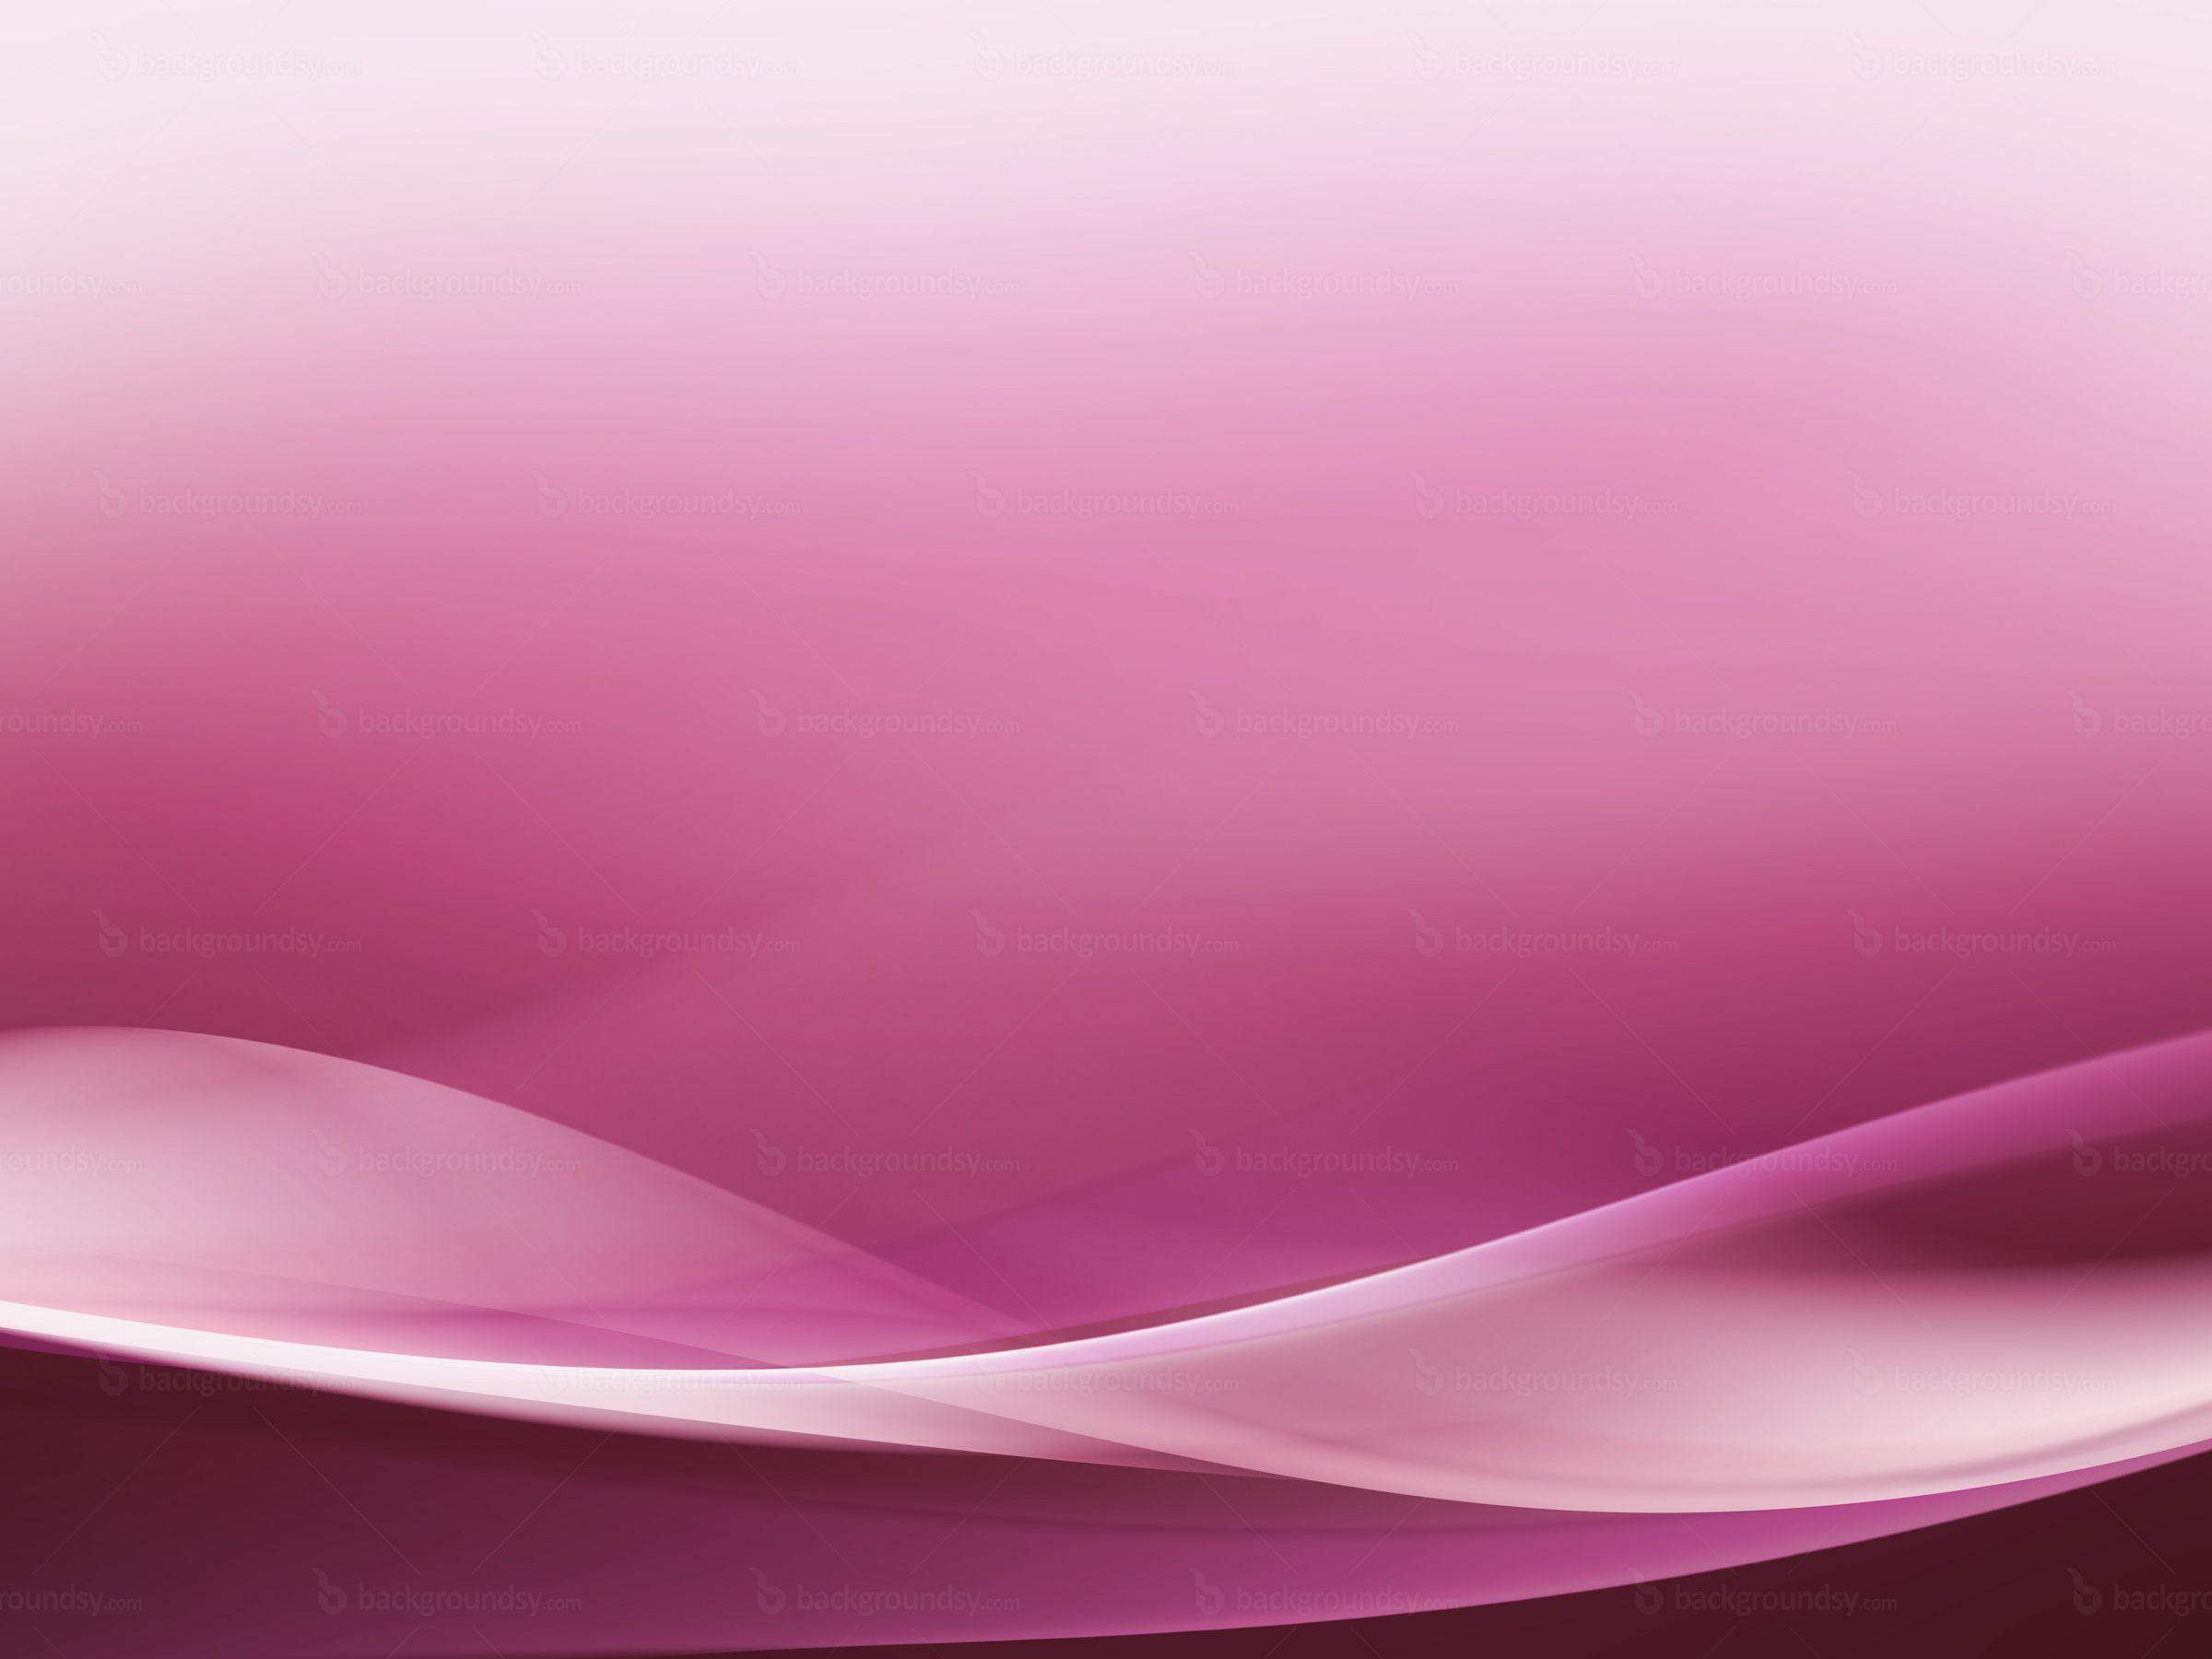 Abstract pink Background 363409 Image HD Wallpaper. Wallfoy.com